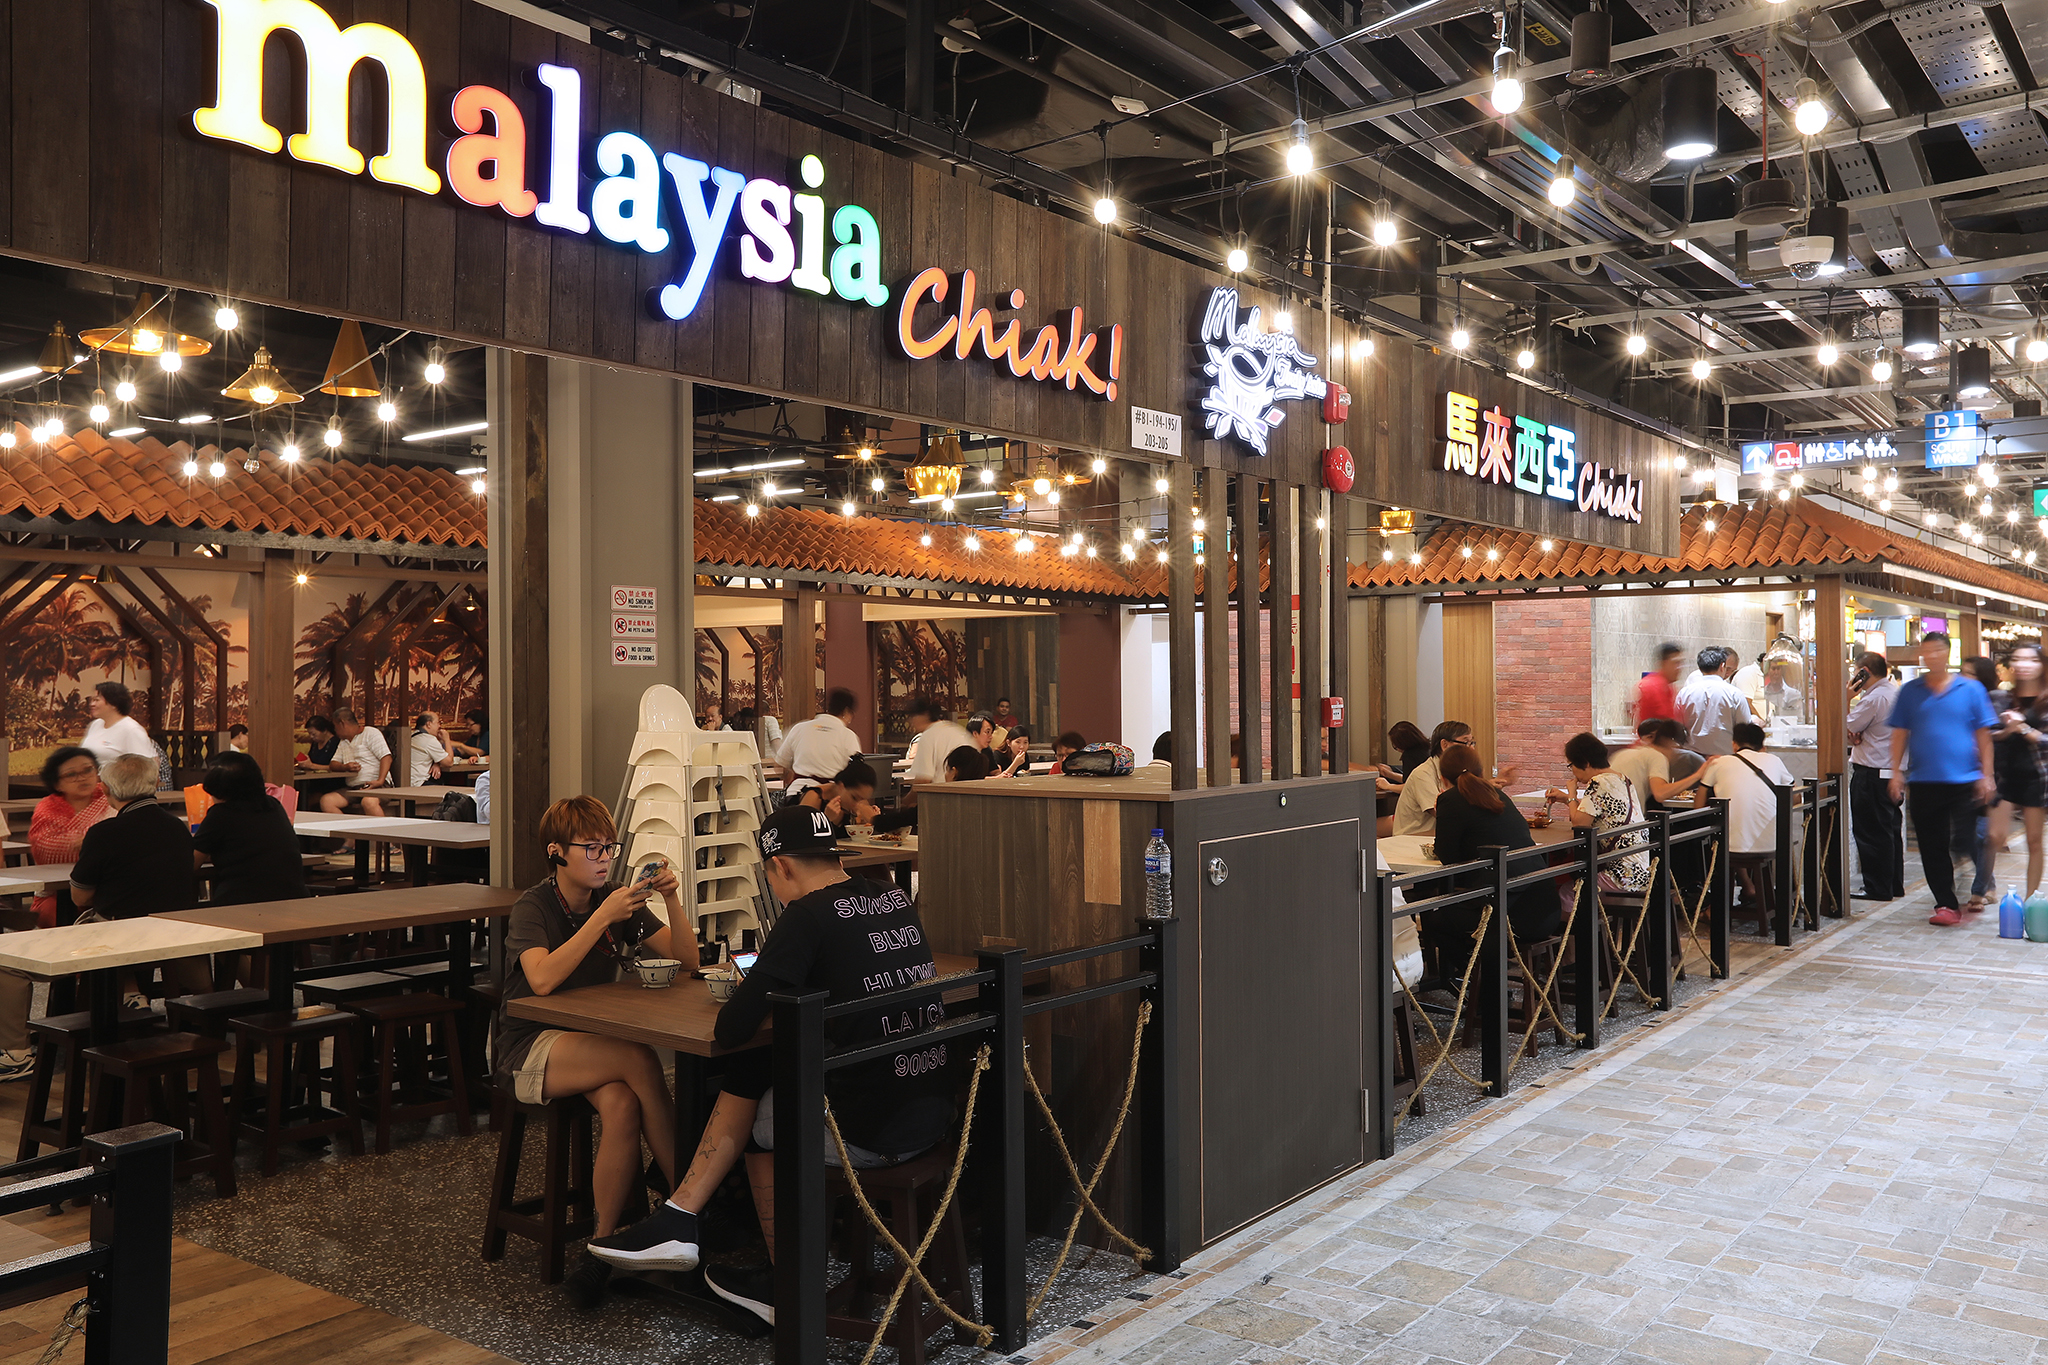 Experience authentic Malaysian street hawker fare at the South Wing’s Malaysia Chiak!